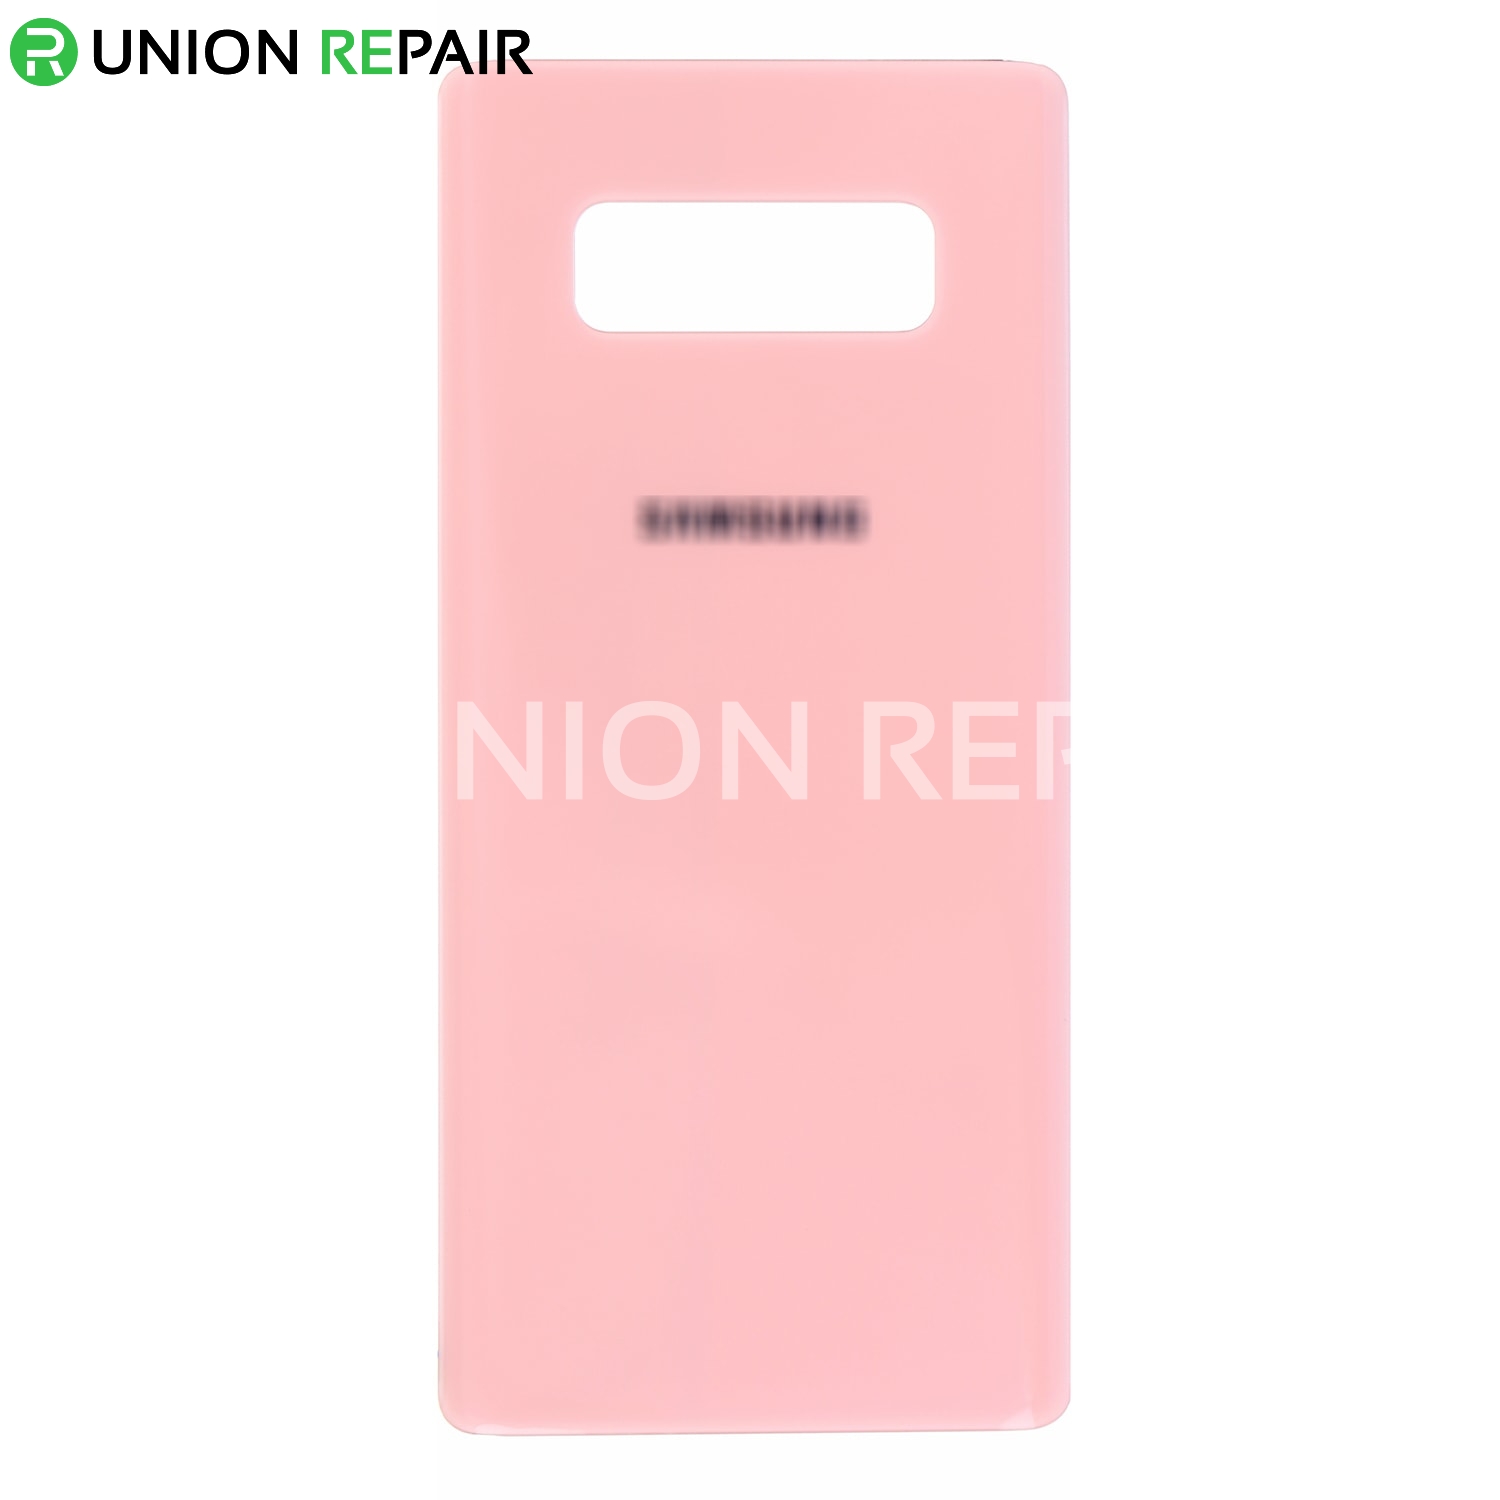 Replacement for Samsung Galaxy Note 8 SM-N950 Back Cover - Star Pink